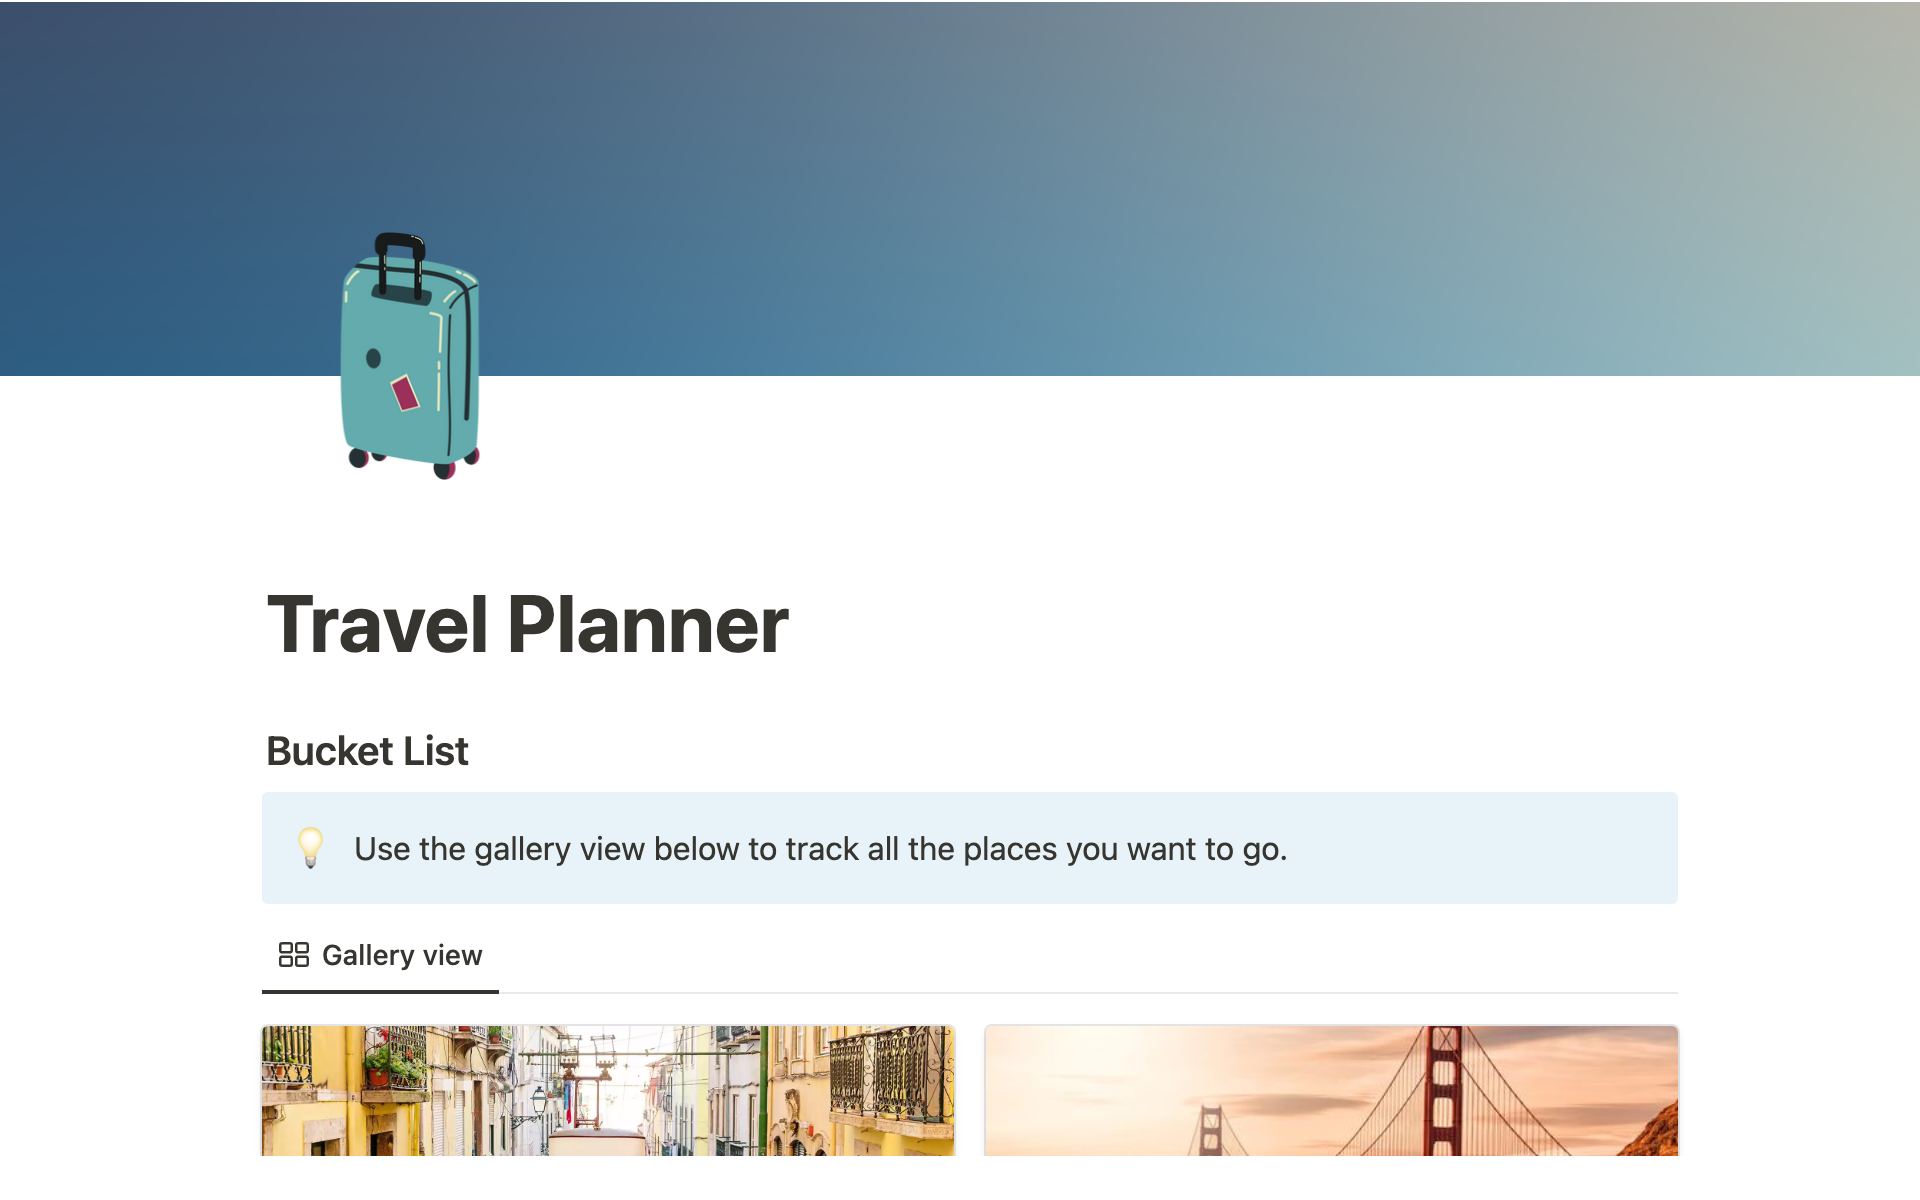 Plan out your trips, create your bucket list, document your travel, and more with this simple Notion page.